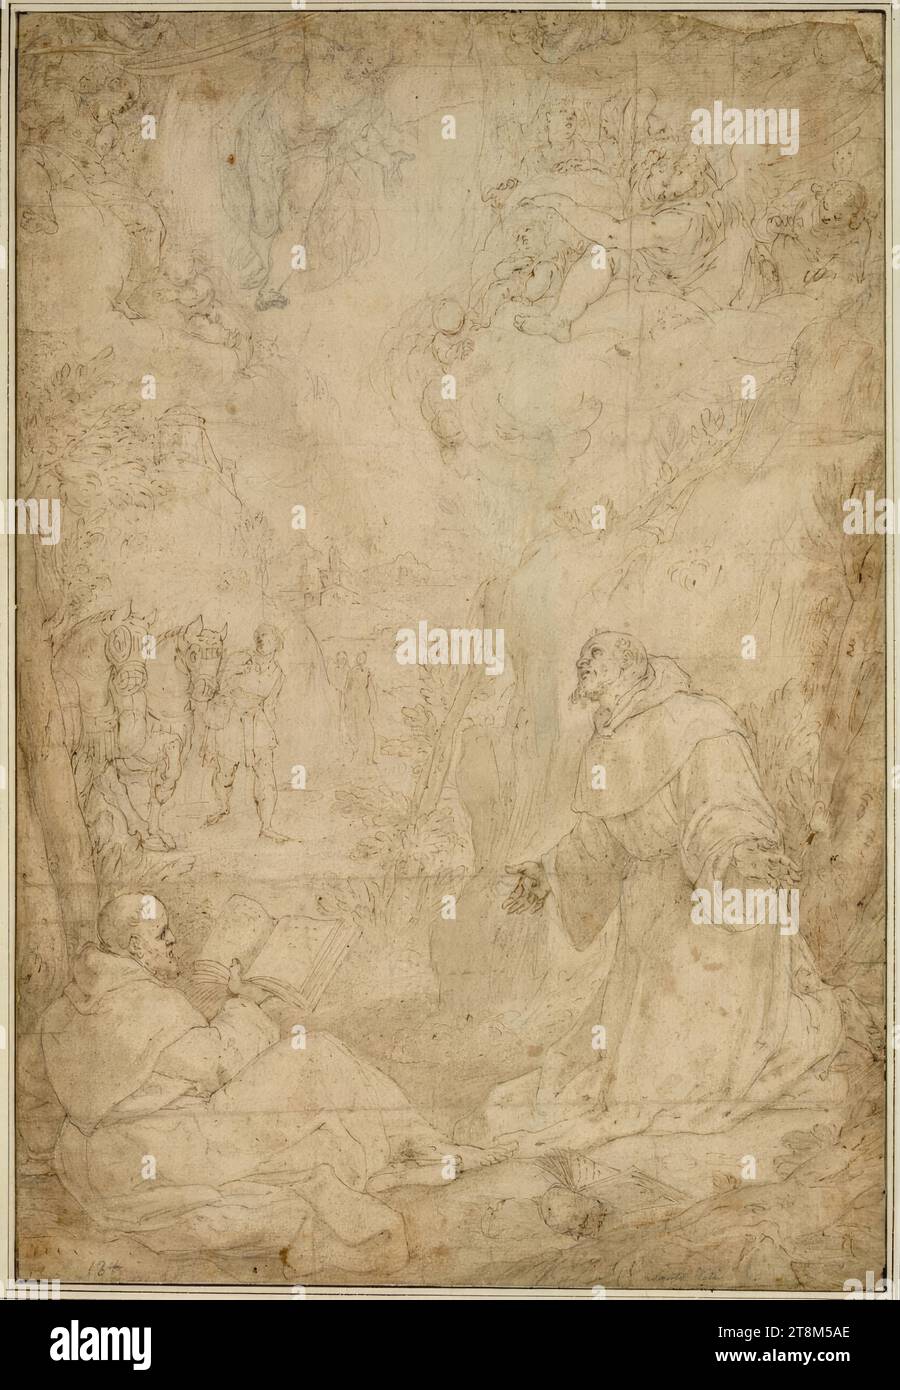 Stigmatization of St. Francis, Filippo Bellini (Italian, 1550/55–1603), Drawing, Metal pencil; Feather; washed; brownish paper, 40.5 x 27.8 cm, l.l. Duke Albert of Saxe-Teschen, old chalk number '134' lower left; Lower right pencil writing from the first half of the 19th century 'Santo Titi Stock Photo